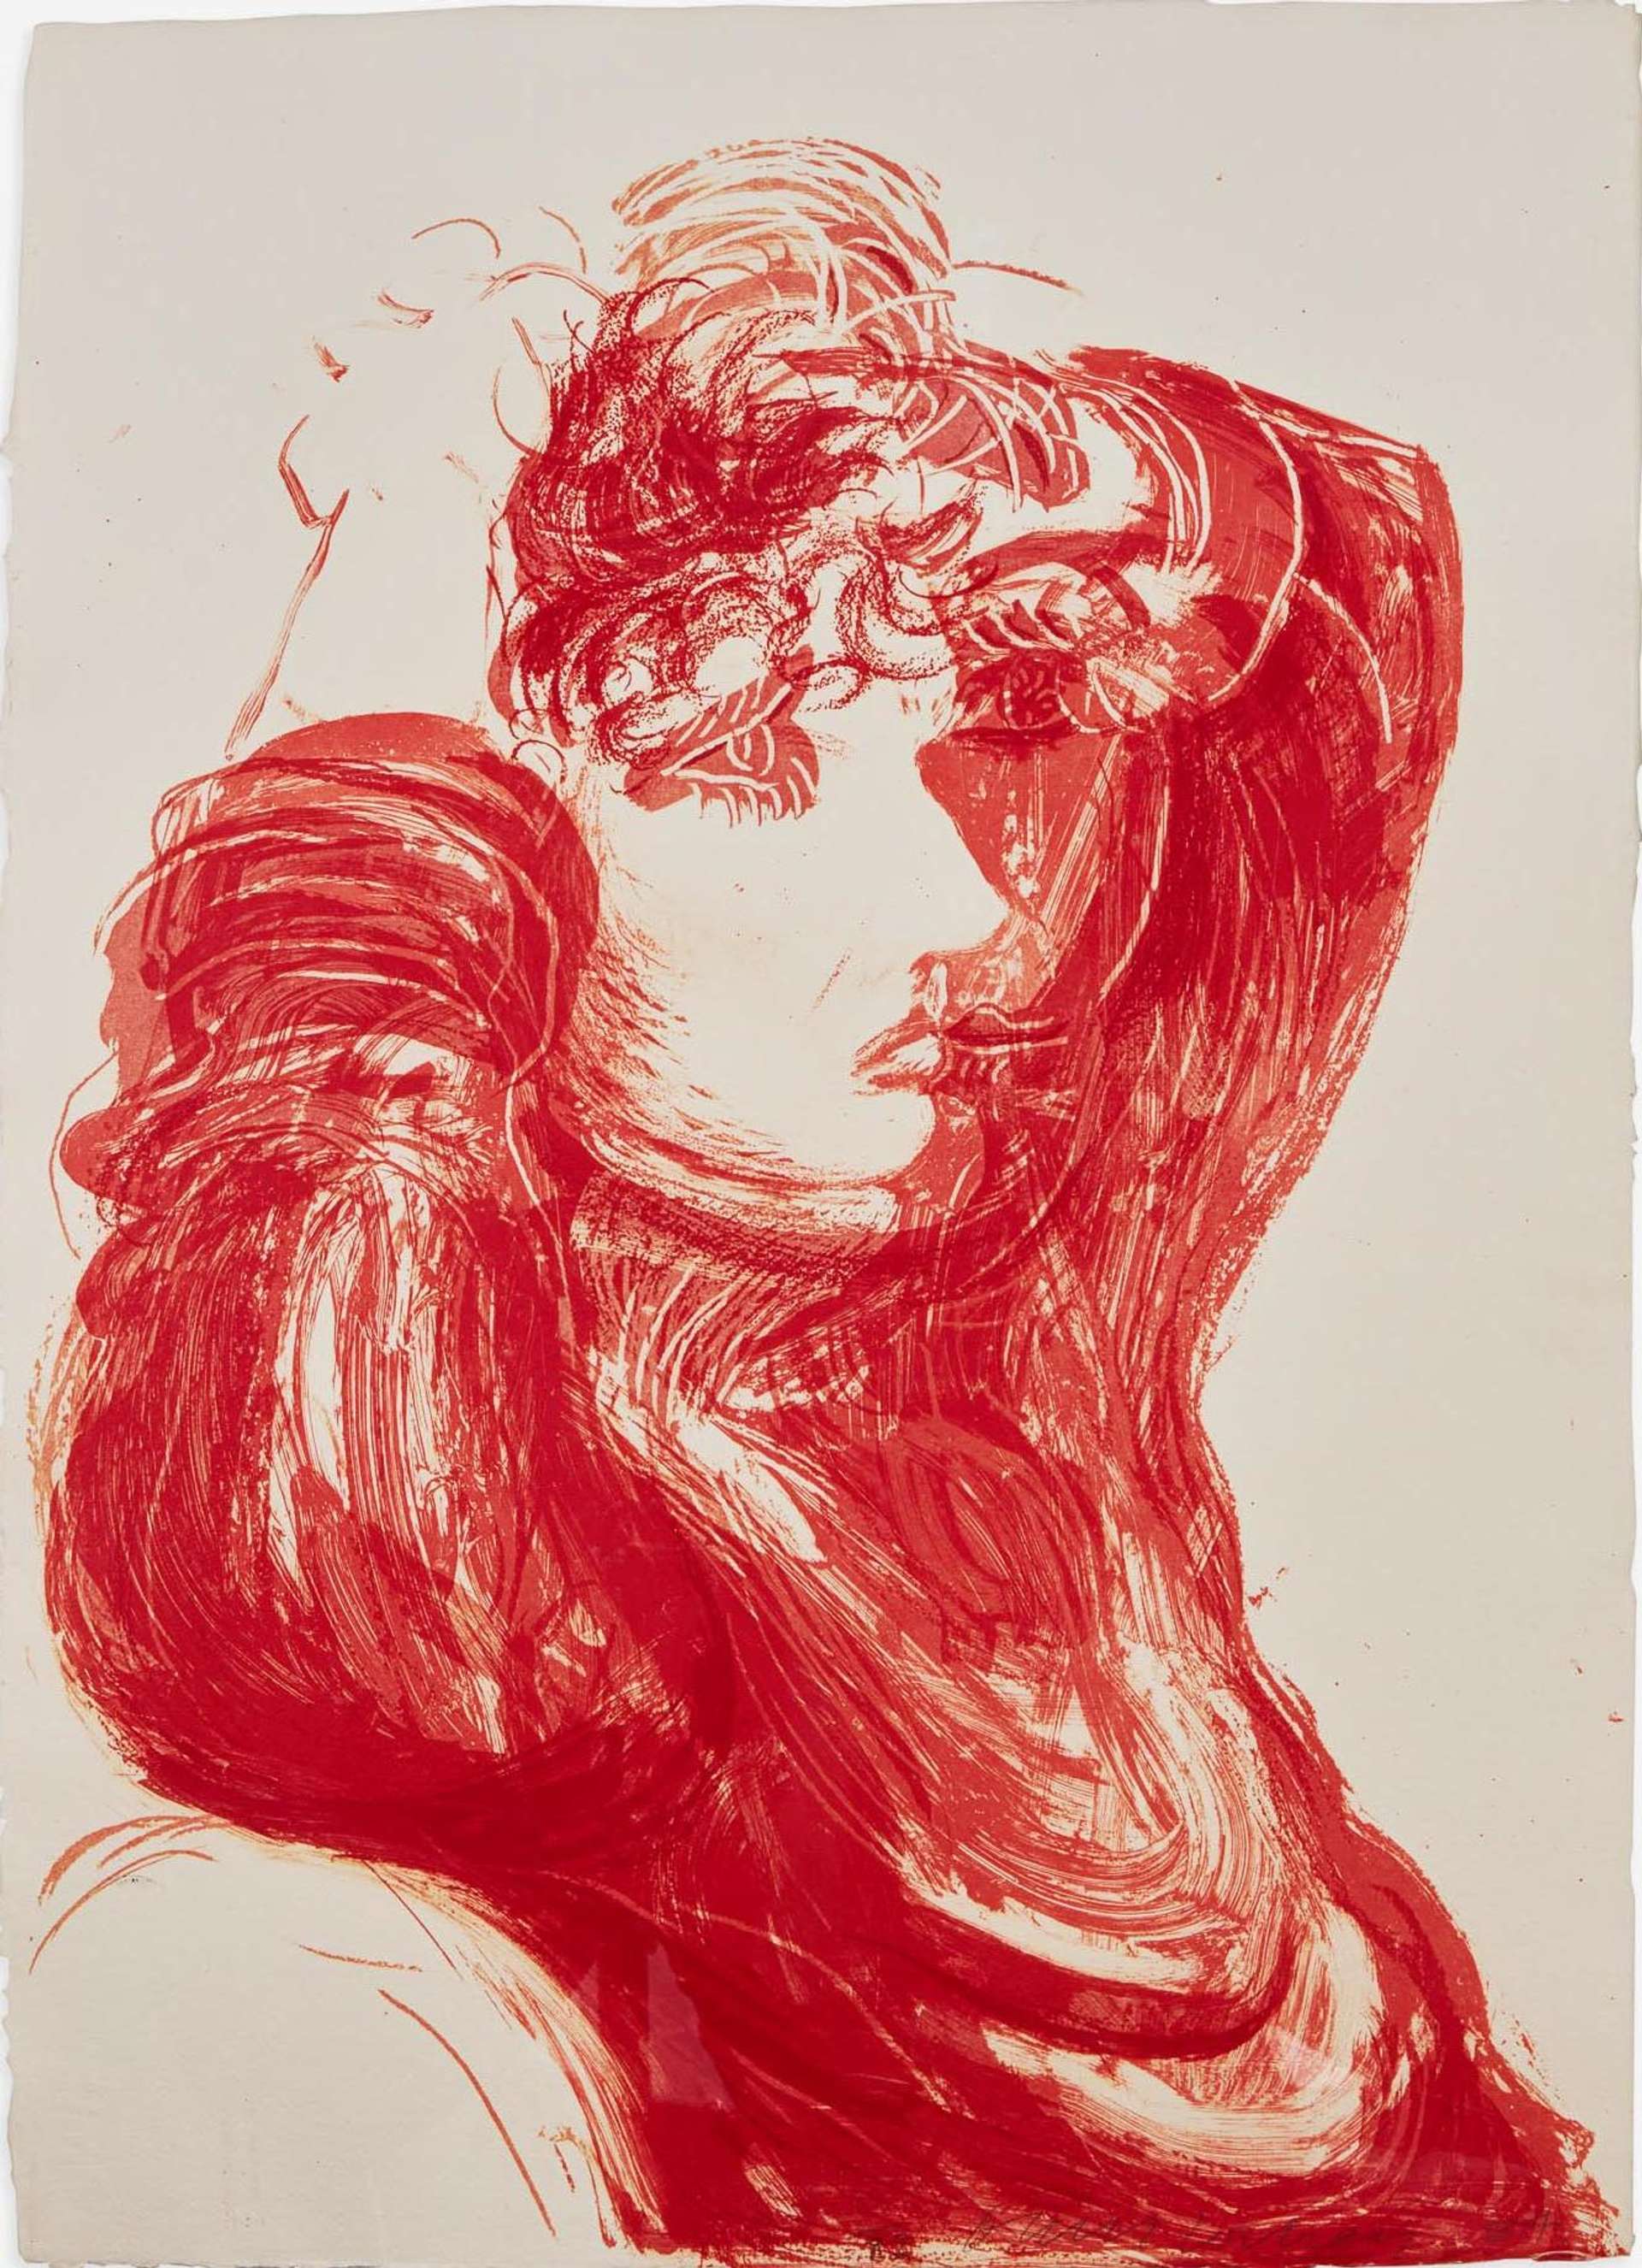 David Hockney’s Red Celia. A lithographic print of a cubist style rendering of the side profile of a woman, seated with her arms raised and folded above her head, all in the colour red. 